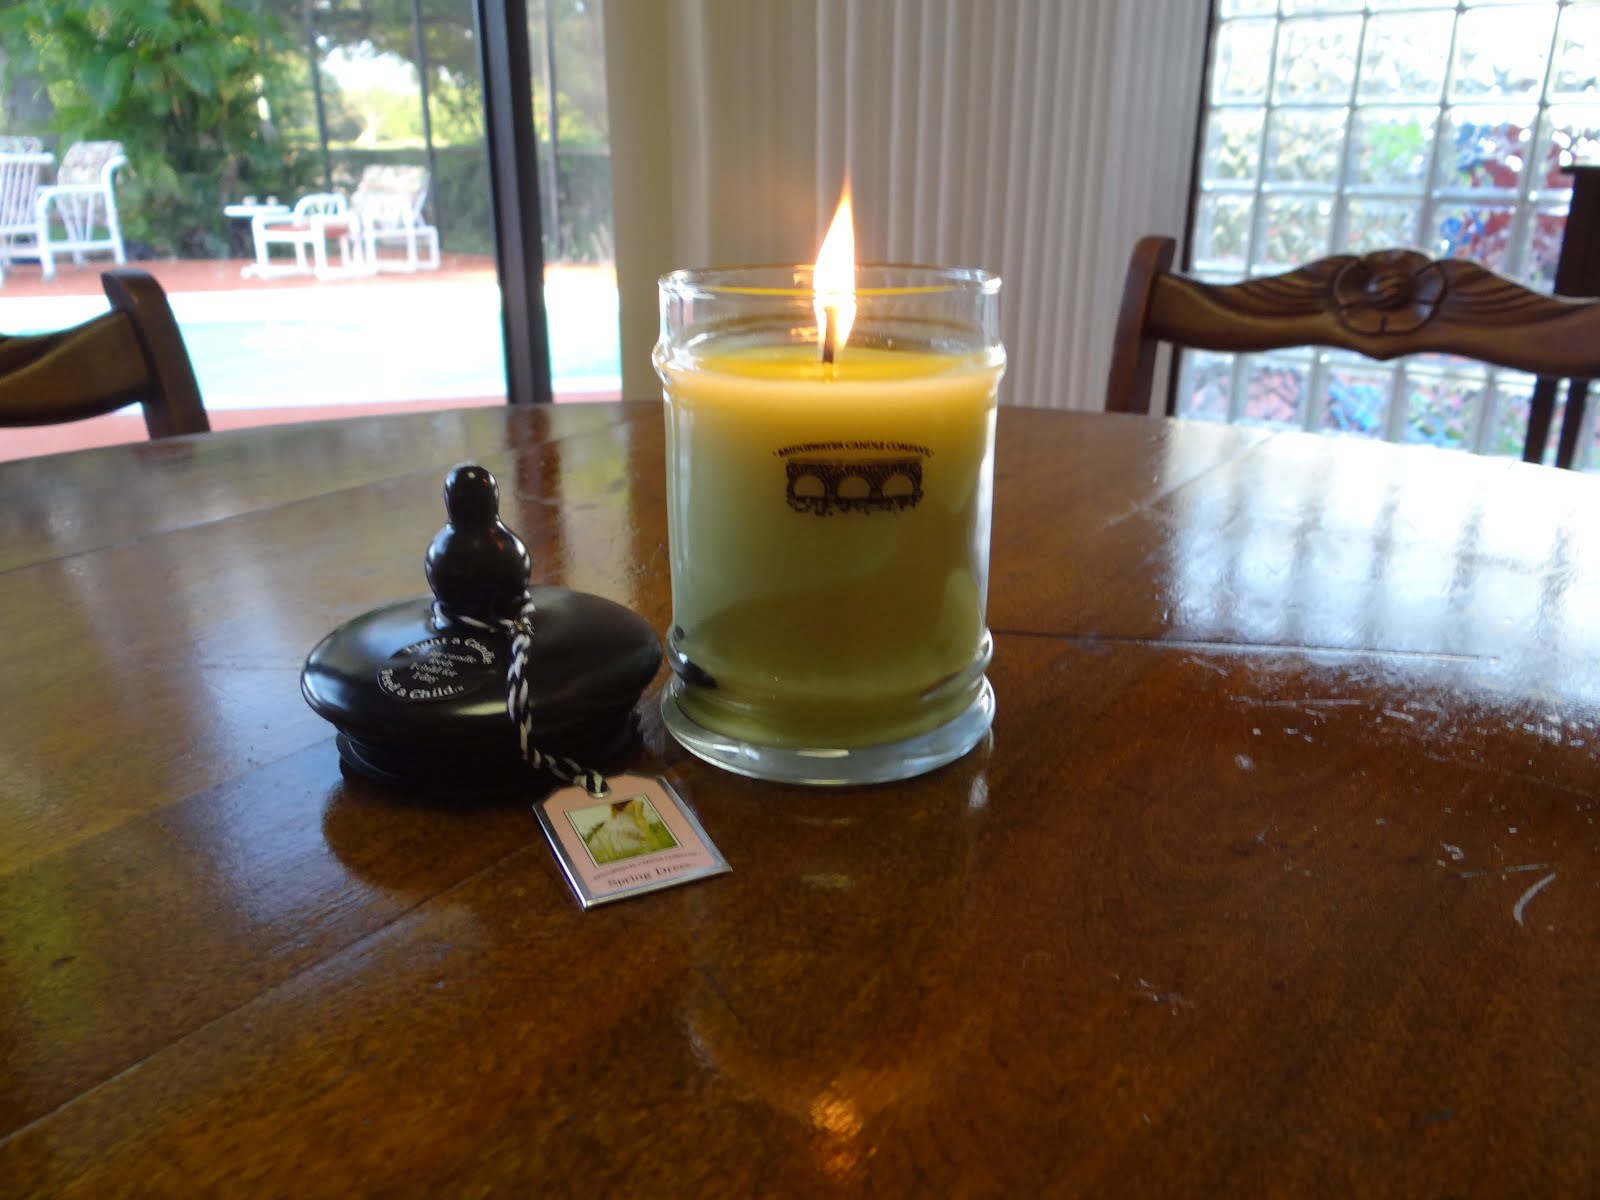 Bridgewater Candle Company Soy Candles!